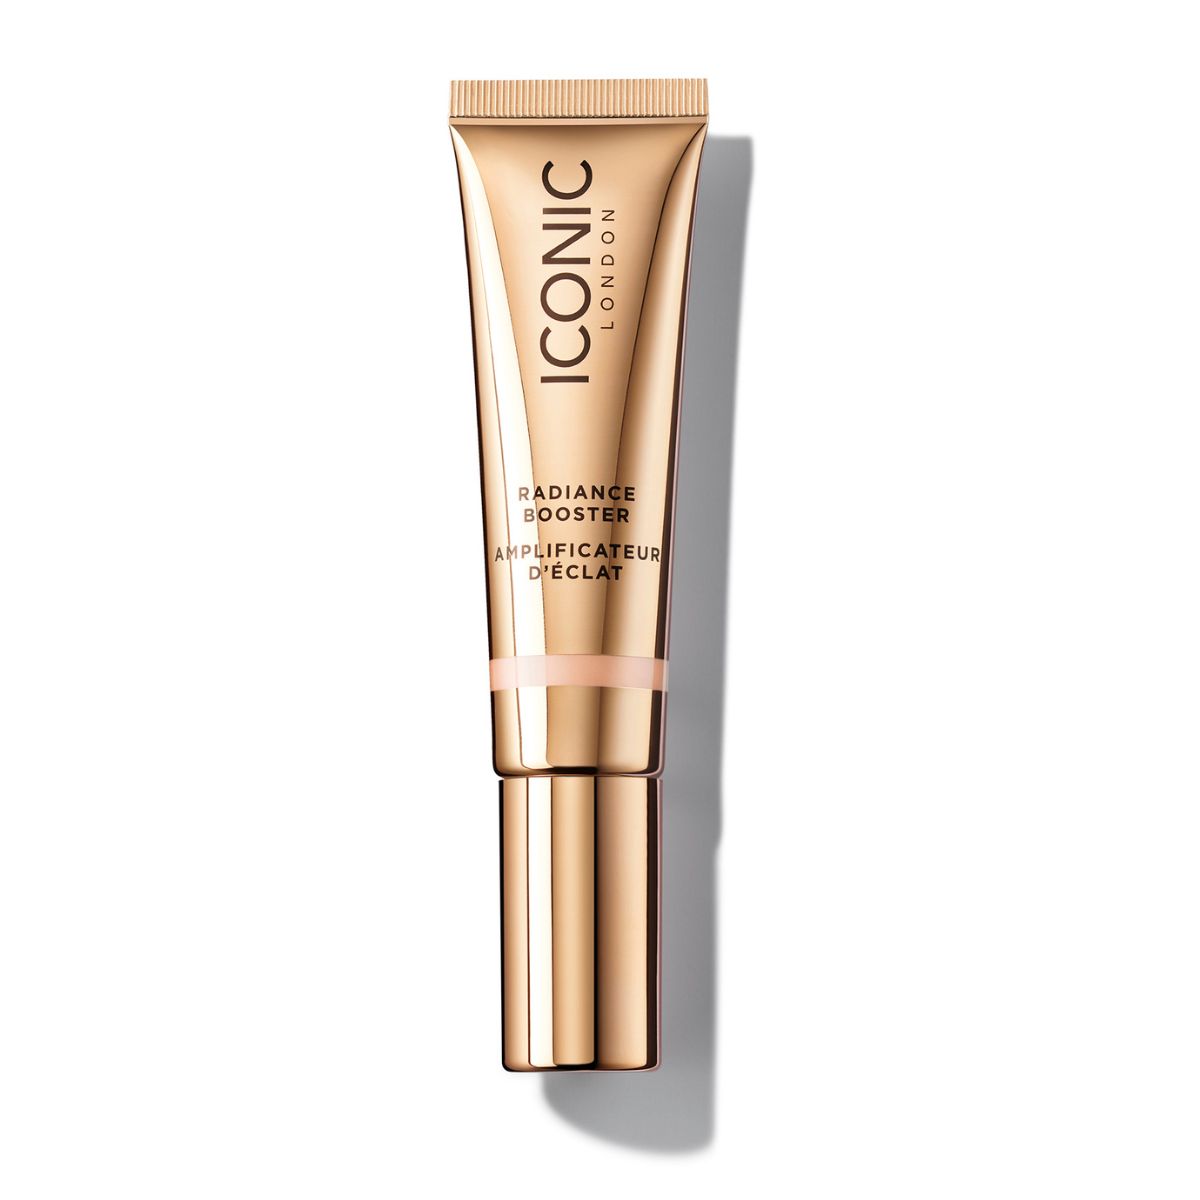 Iconic London Radiance Booster